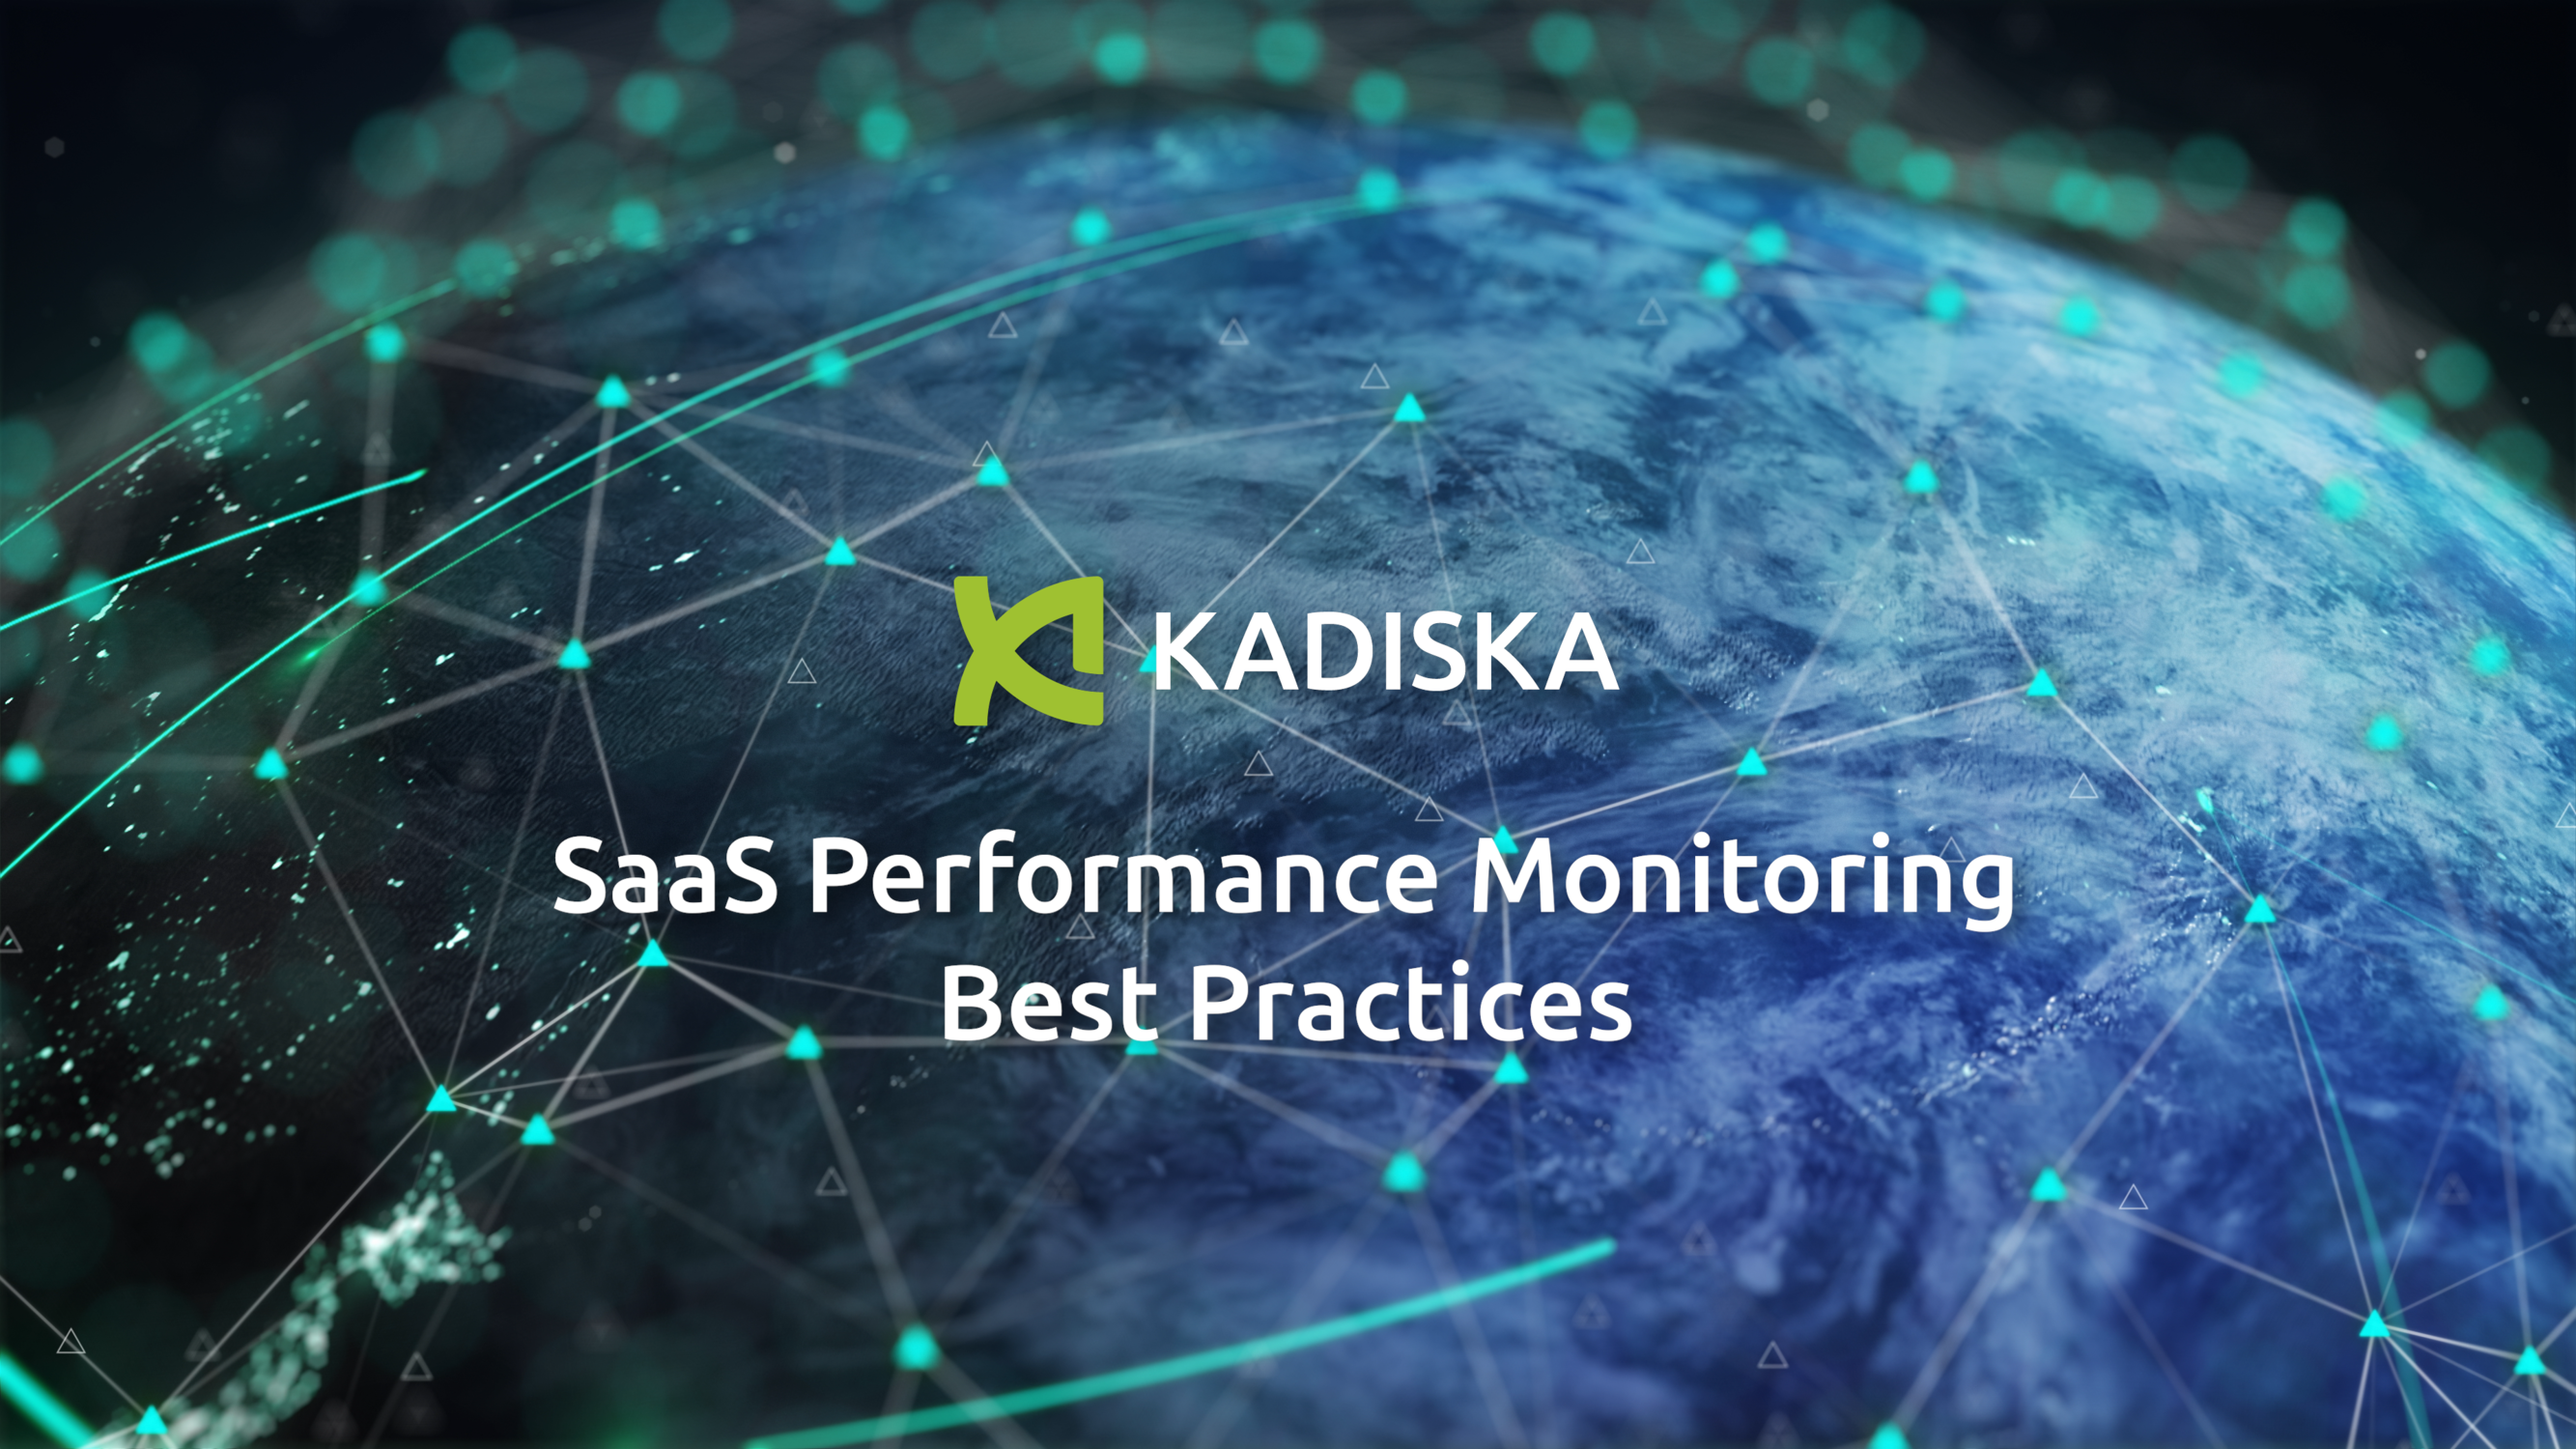 SaaS Performance Monitoring - Best Practices